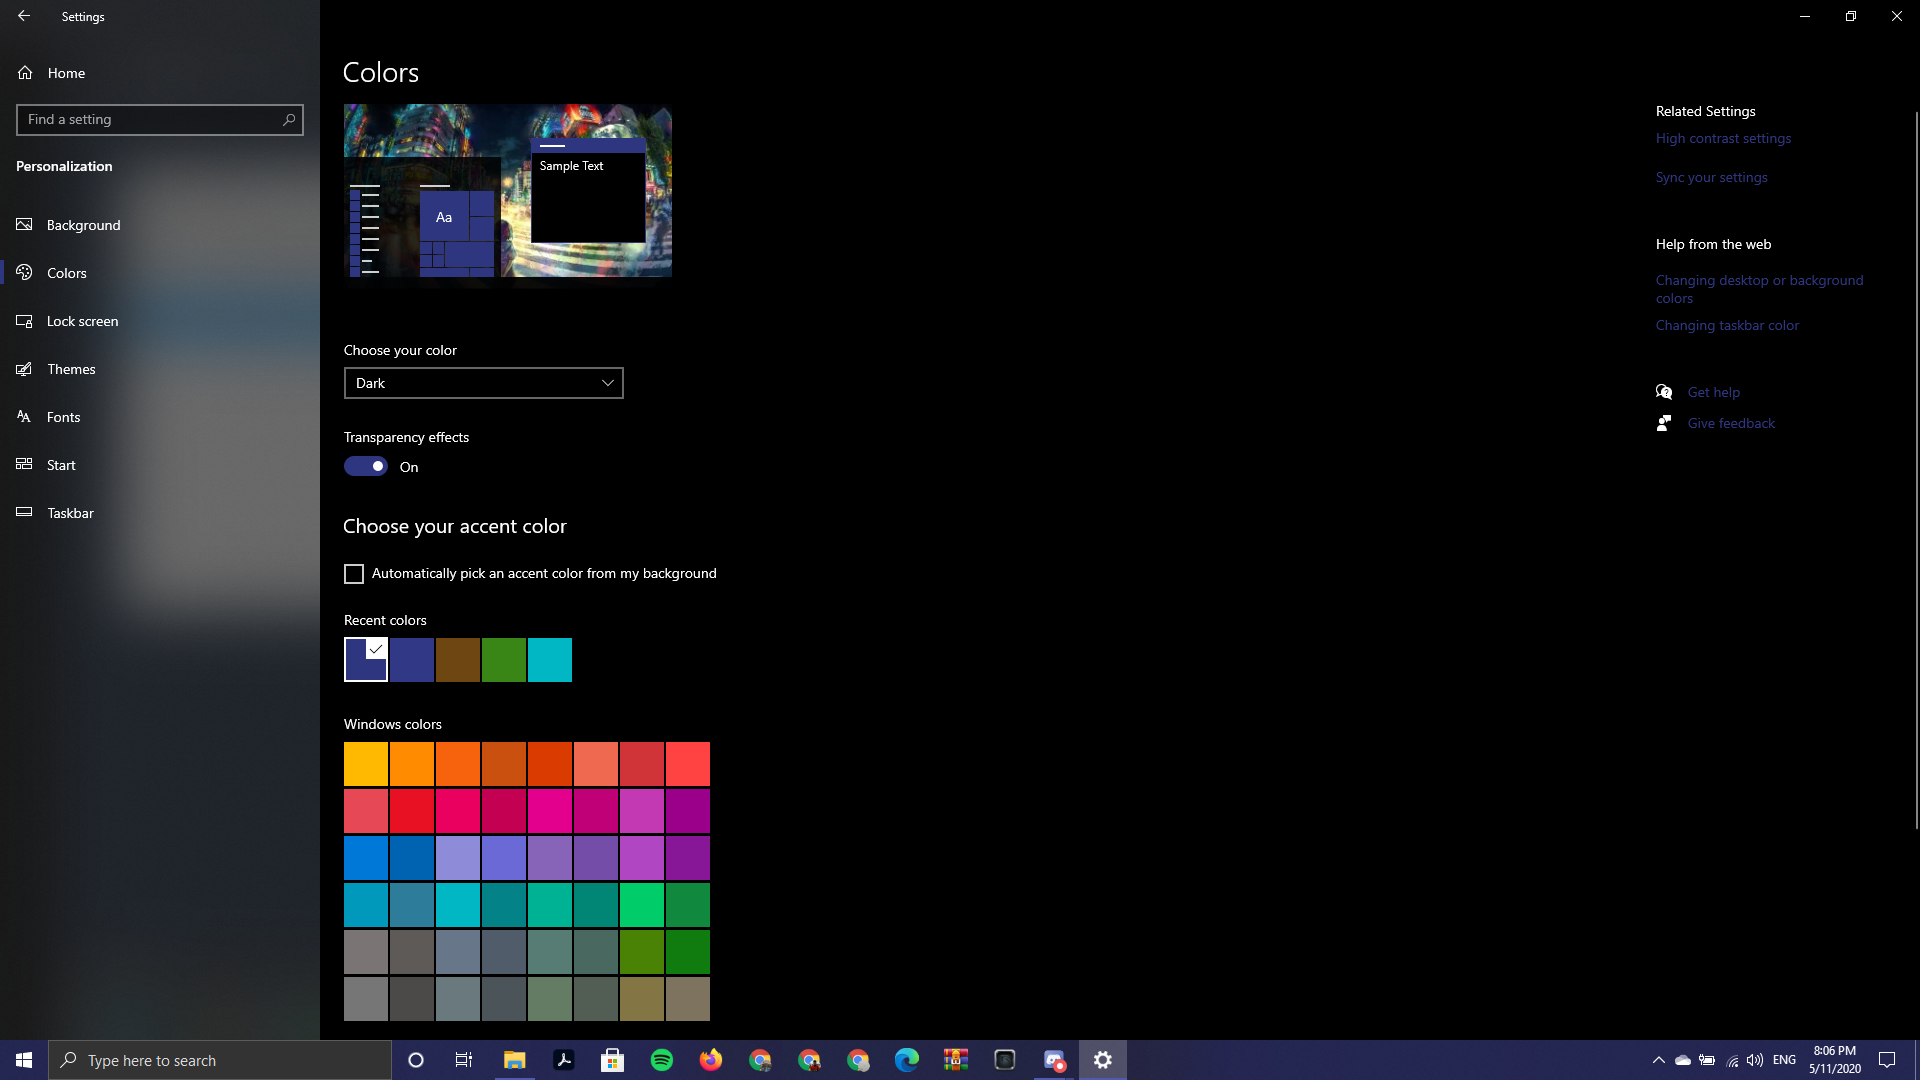 Colour not appearing on Title Bars, WIndow Borders & Apps on Start Menu 82a93cb1-3c06-495f-abd7-cba678c09be0?upload=true.png